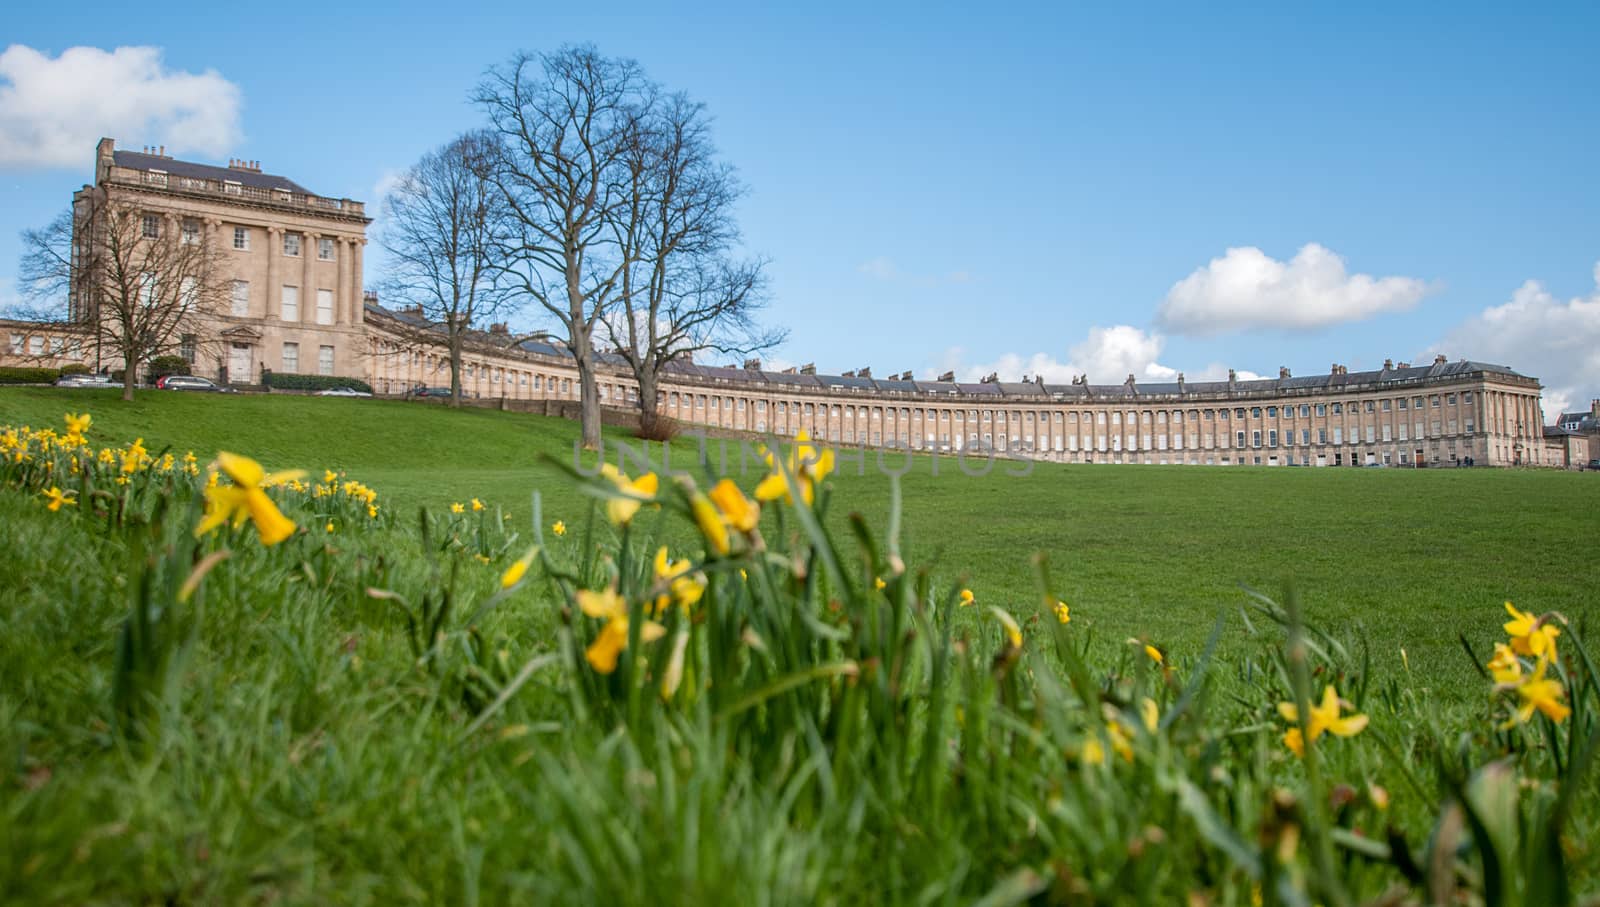 the iconic royal crecent in bath is the backdrop against the early spring daffodils